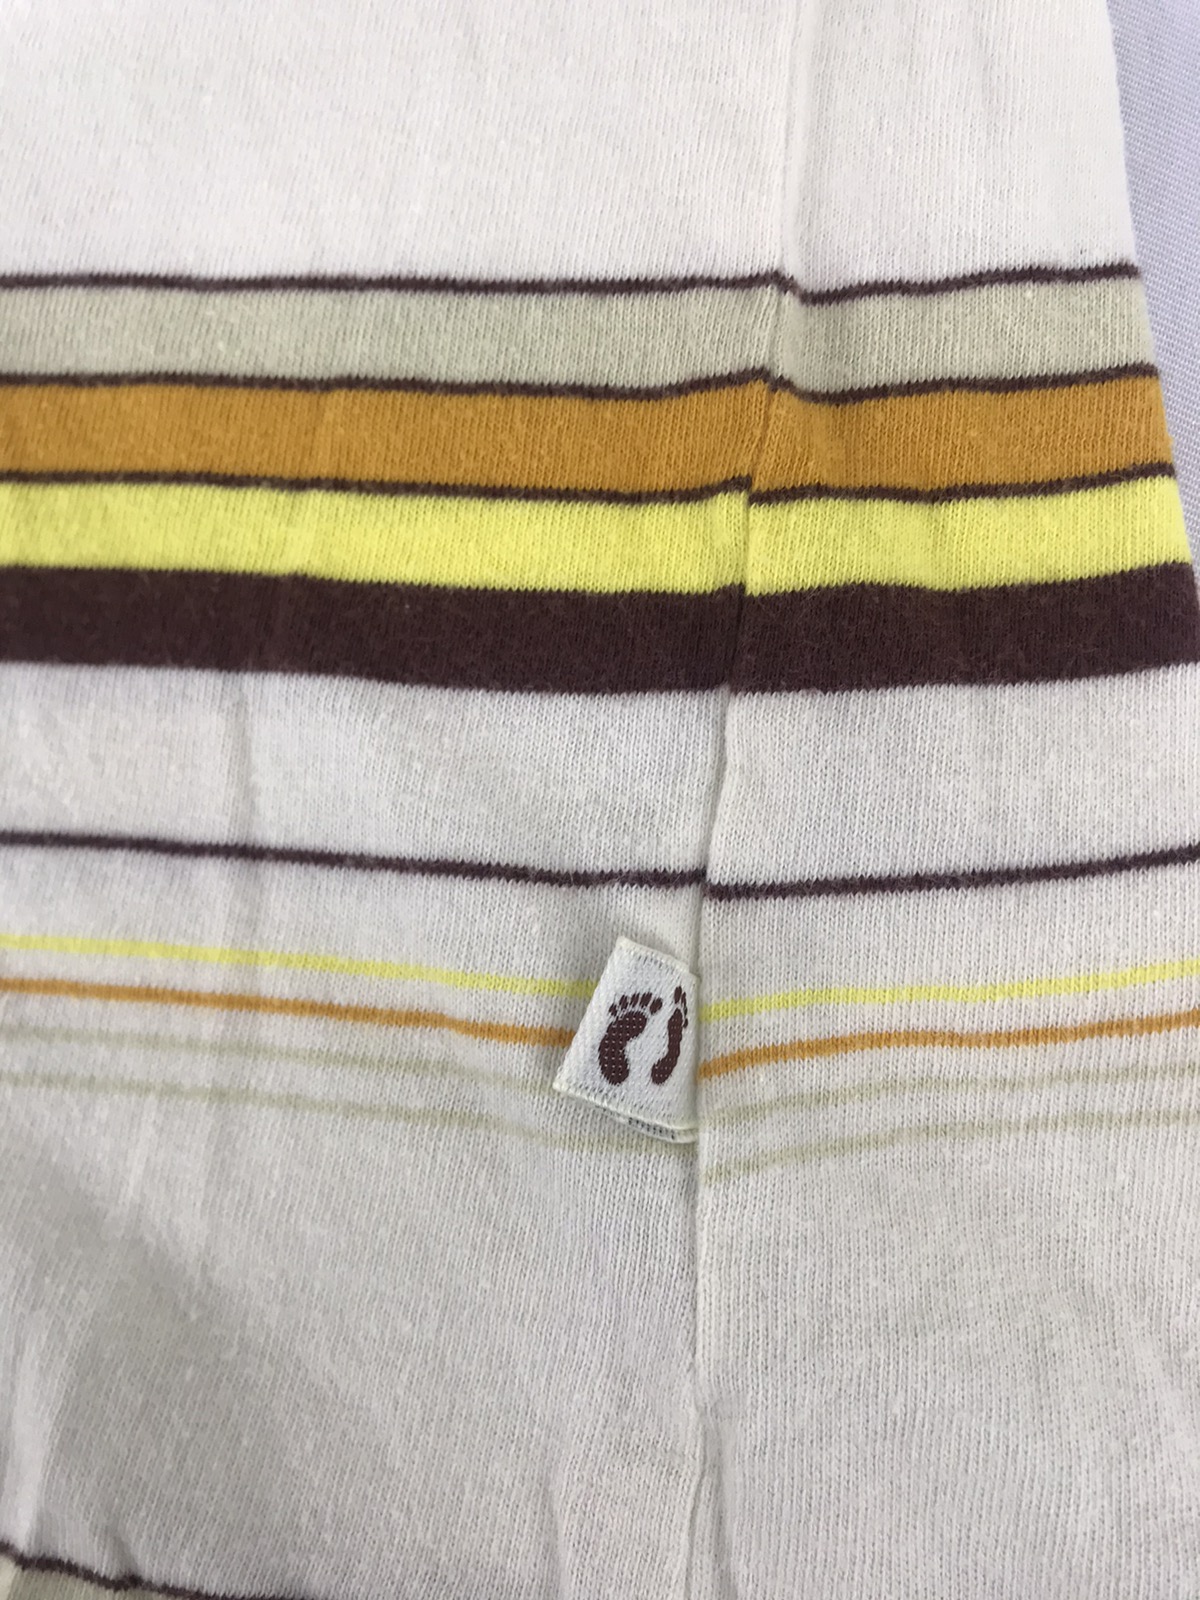 Vintage - Hang Ten Classic Colorful Striped Surf Style Polo Tee - 5